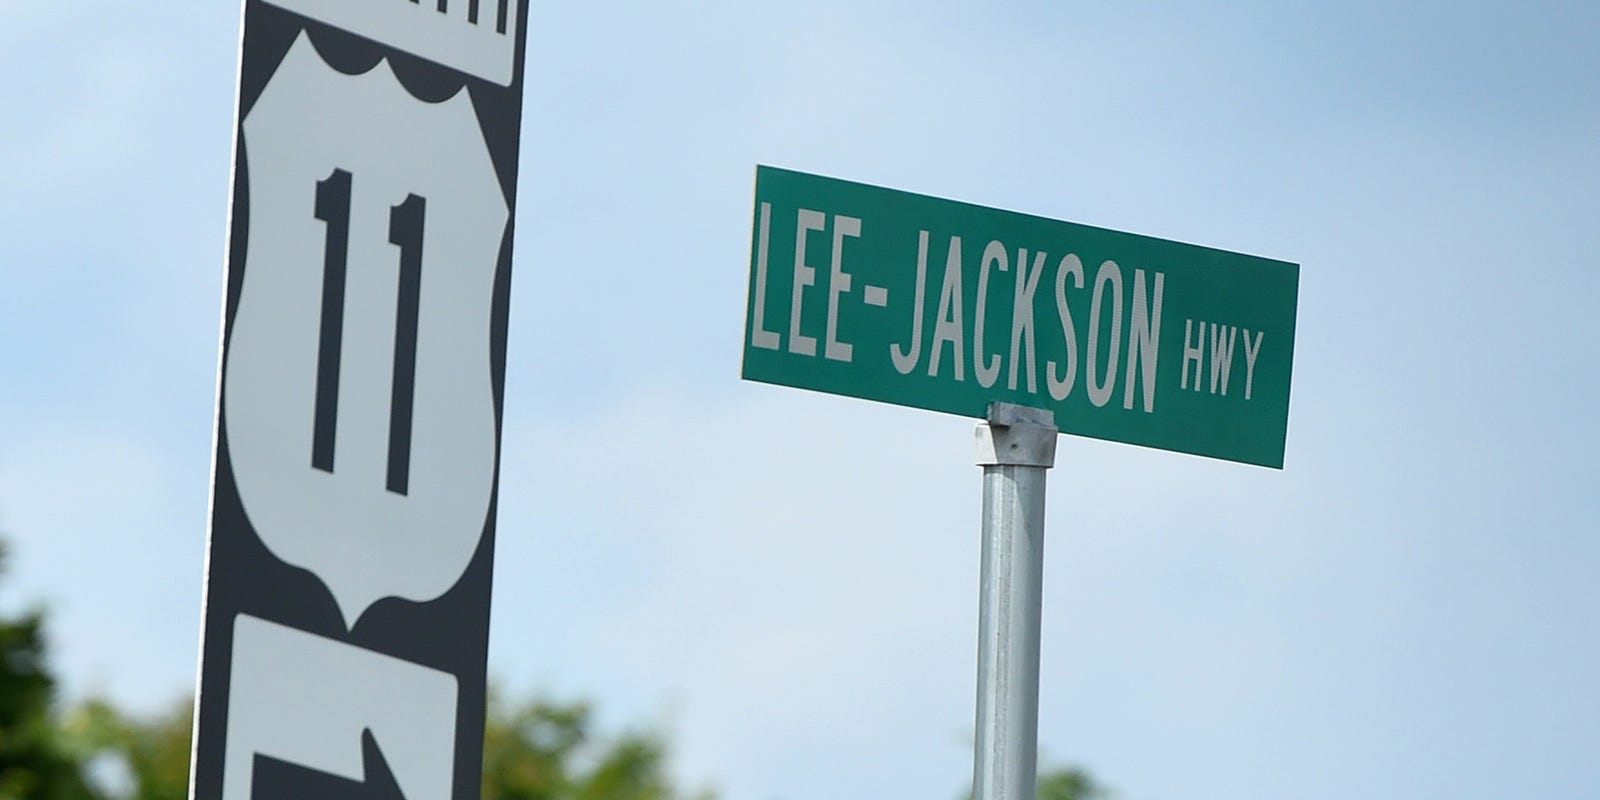 Lee Jackson Highway's name: how could it be changed?